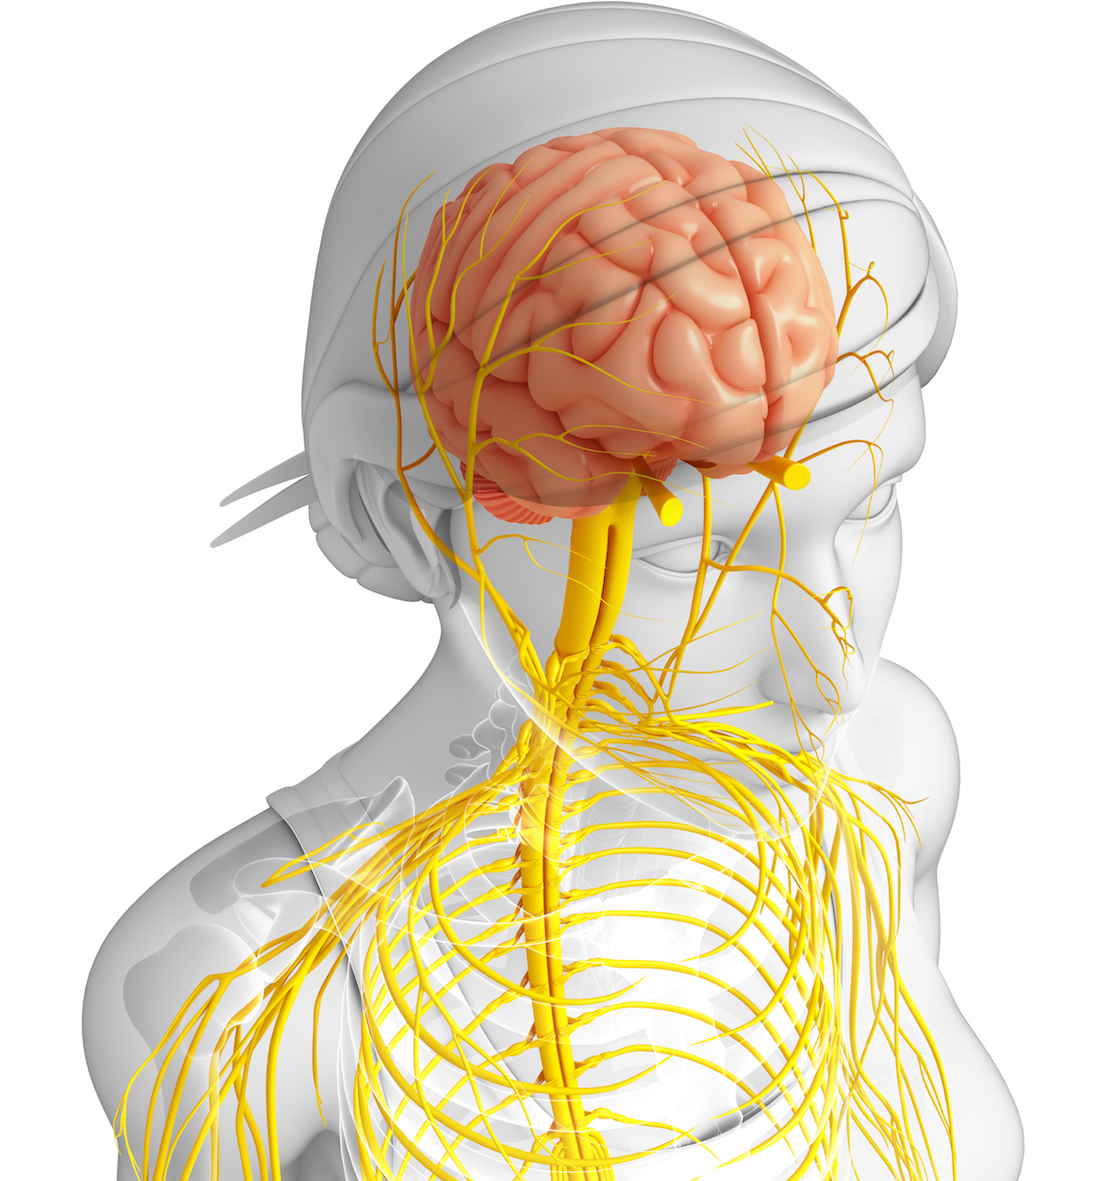 a female body showing an inside view of the nervous system and brain emphasizing the importance of emotional self regulation